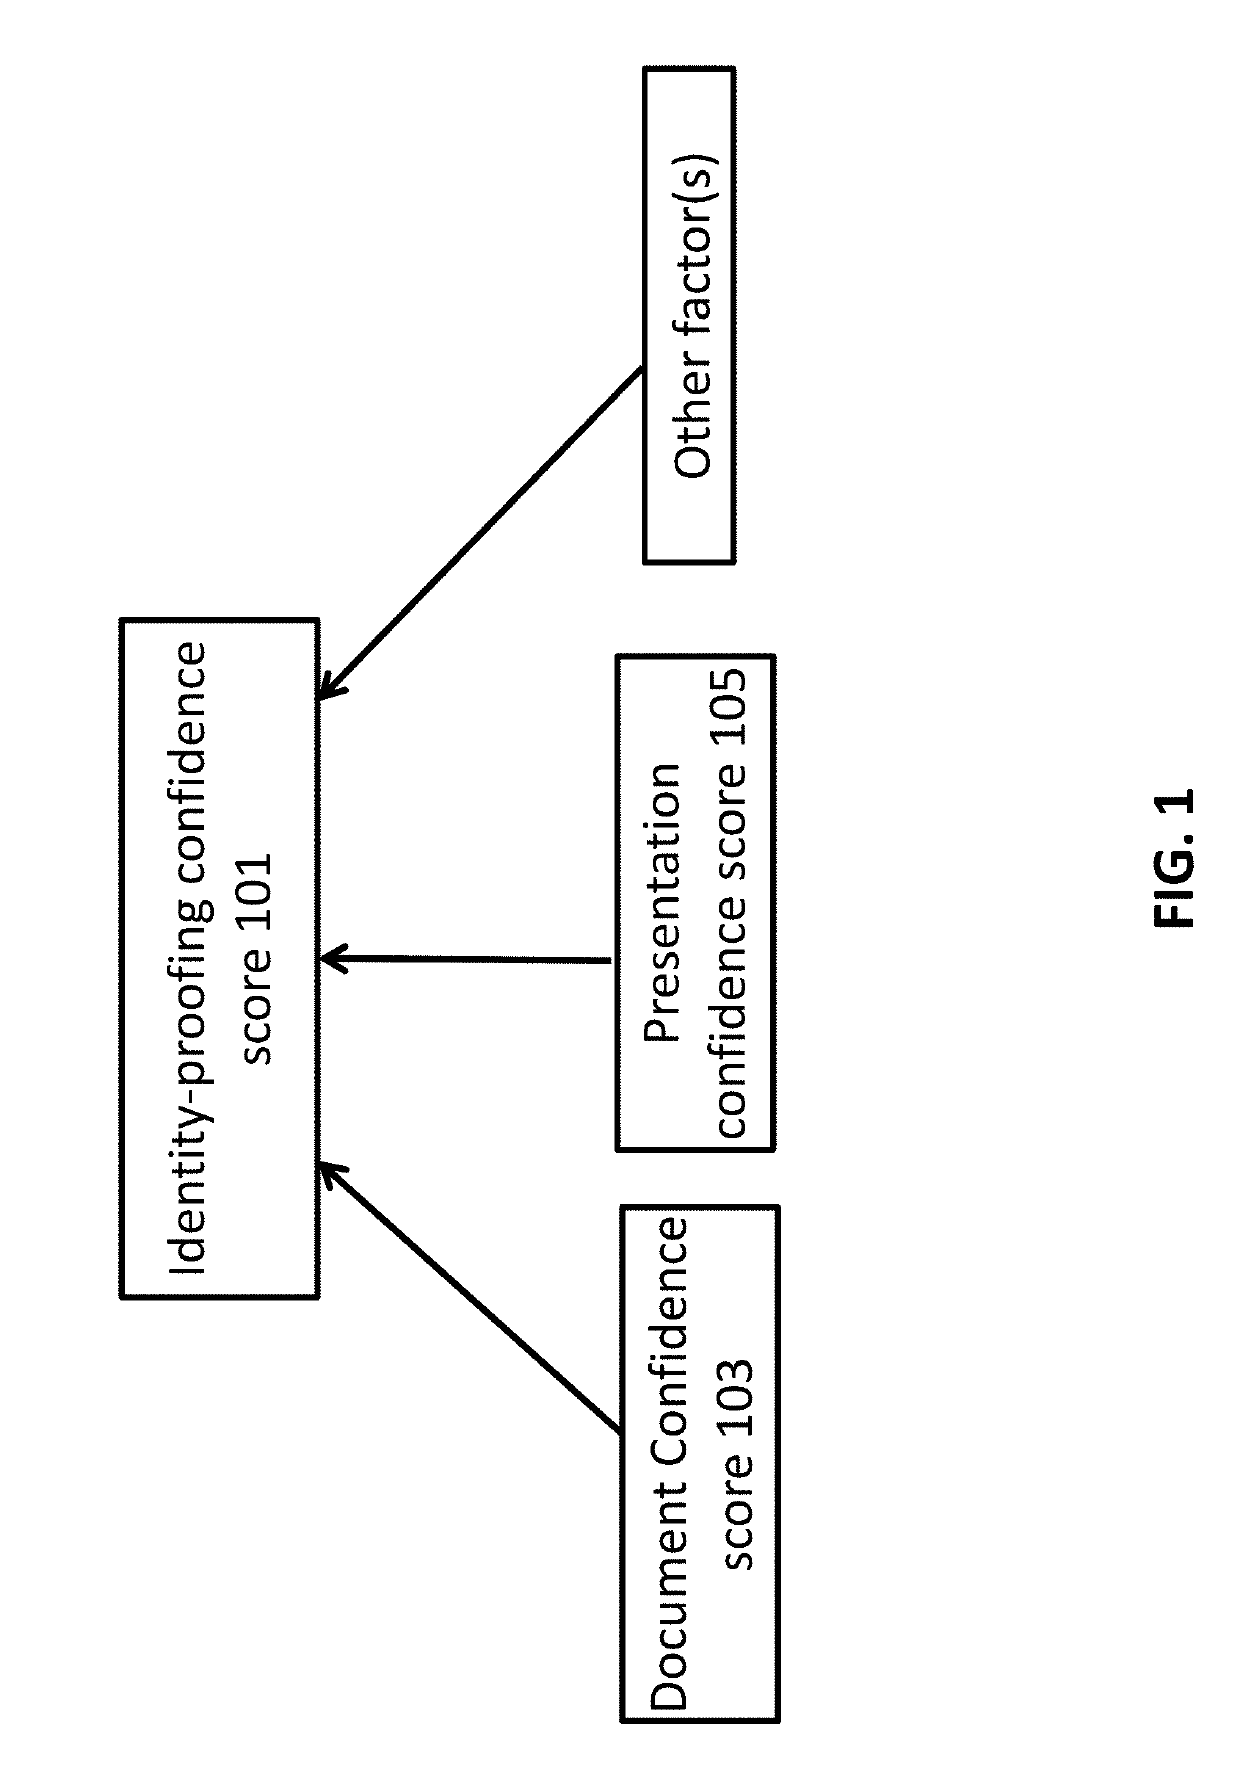 Systems and methods for distribution of selected authentication information for a network of devices